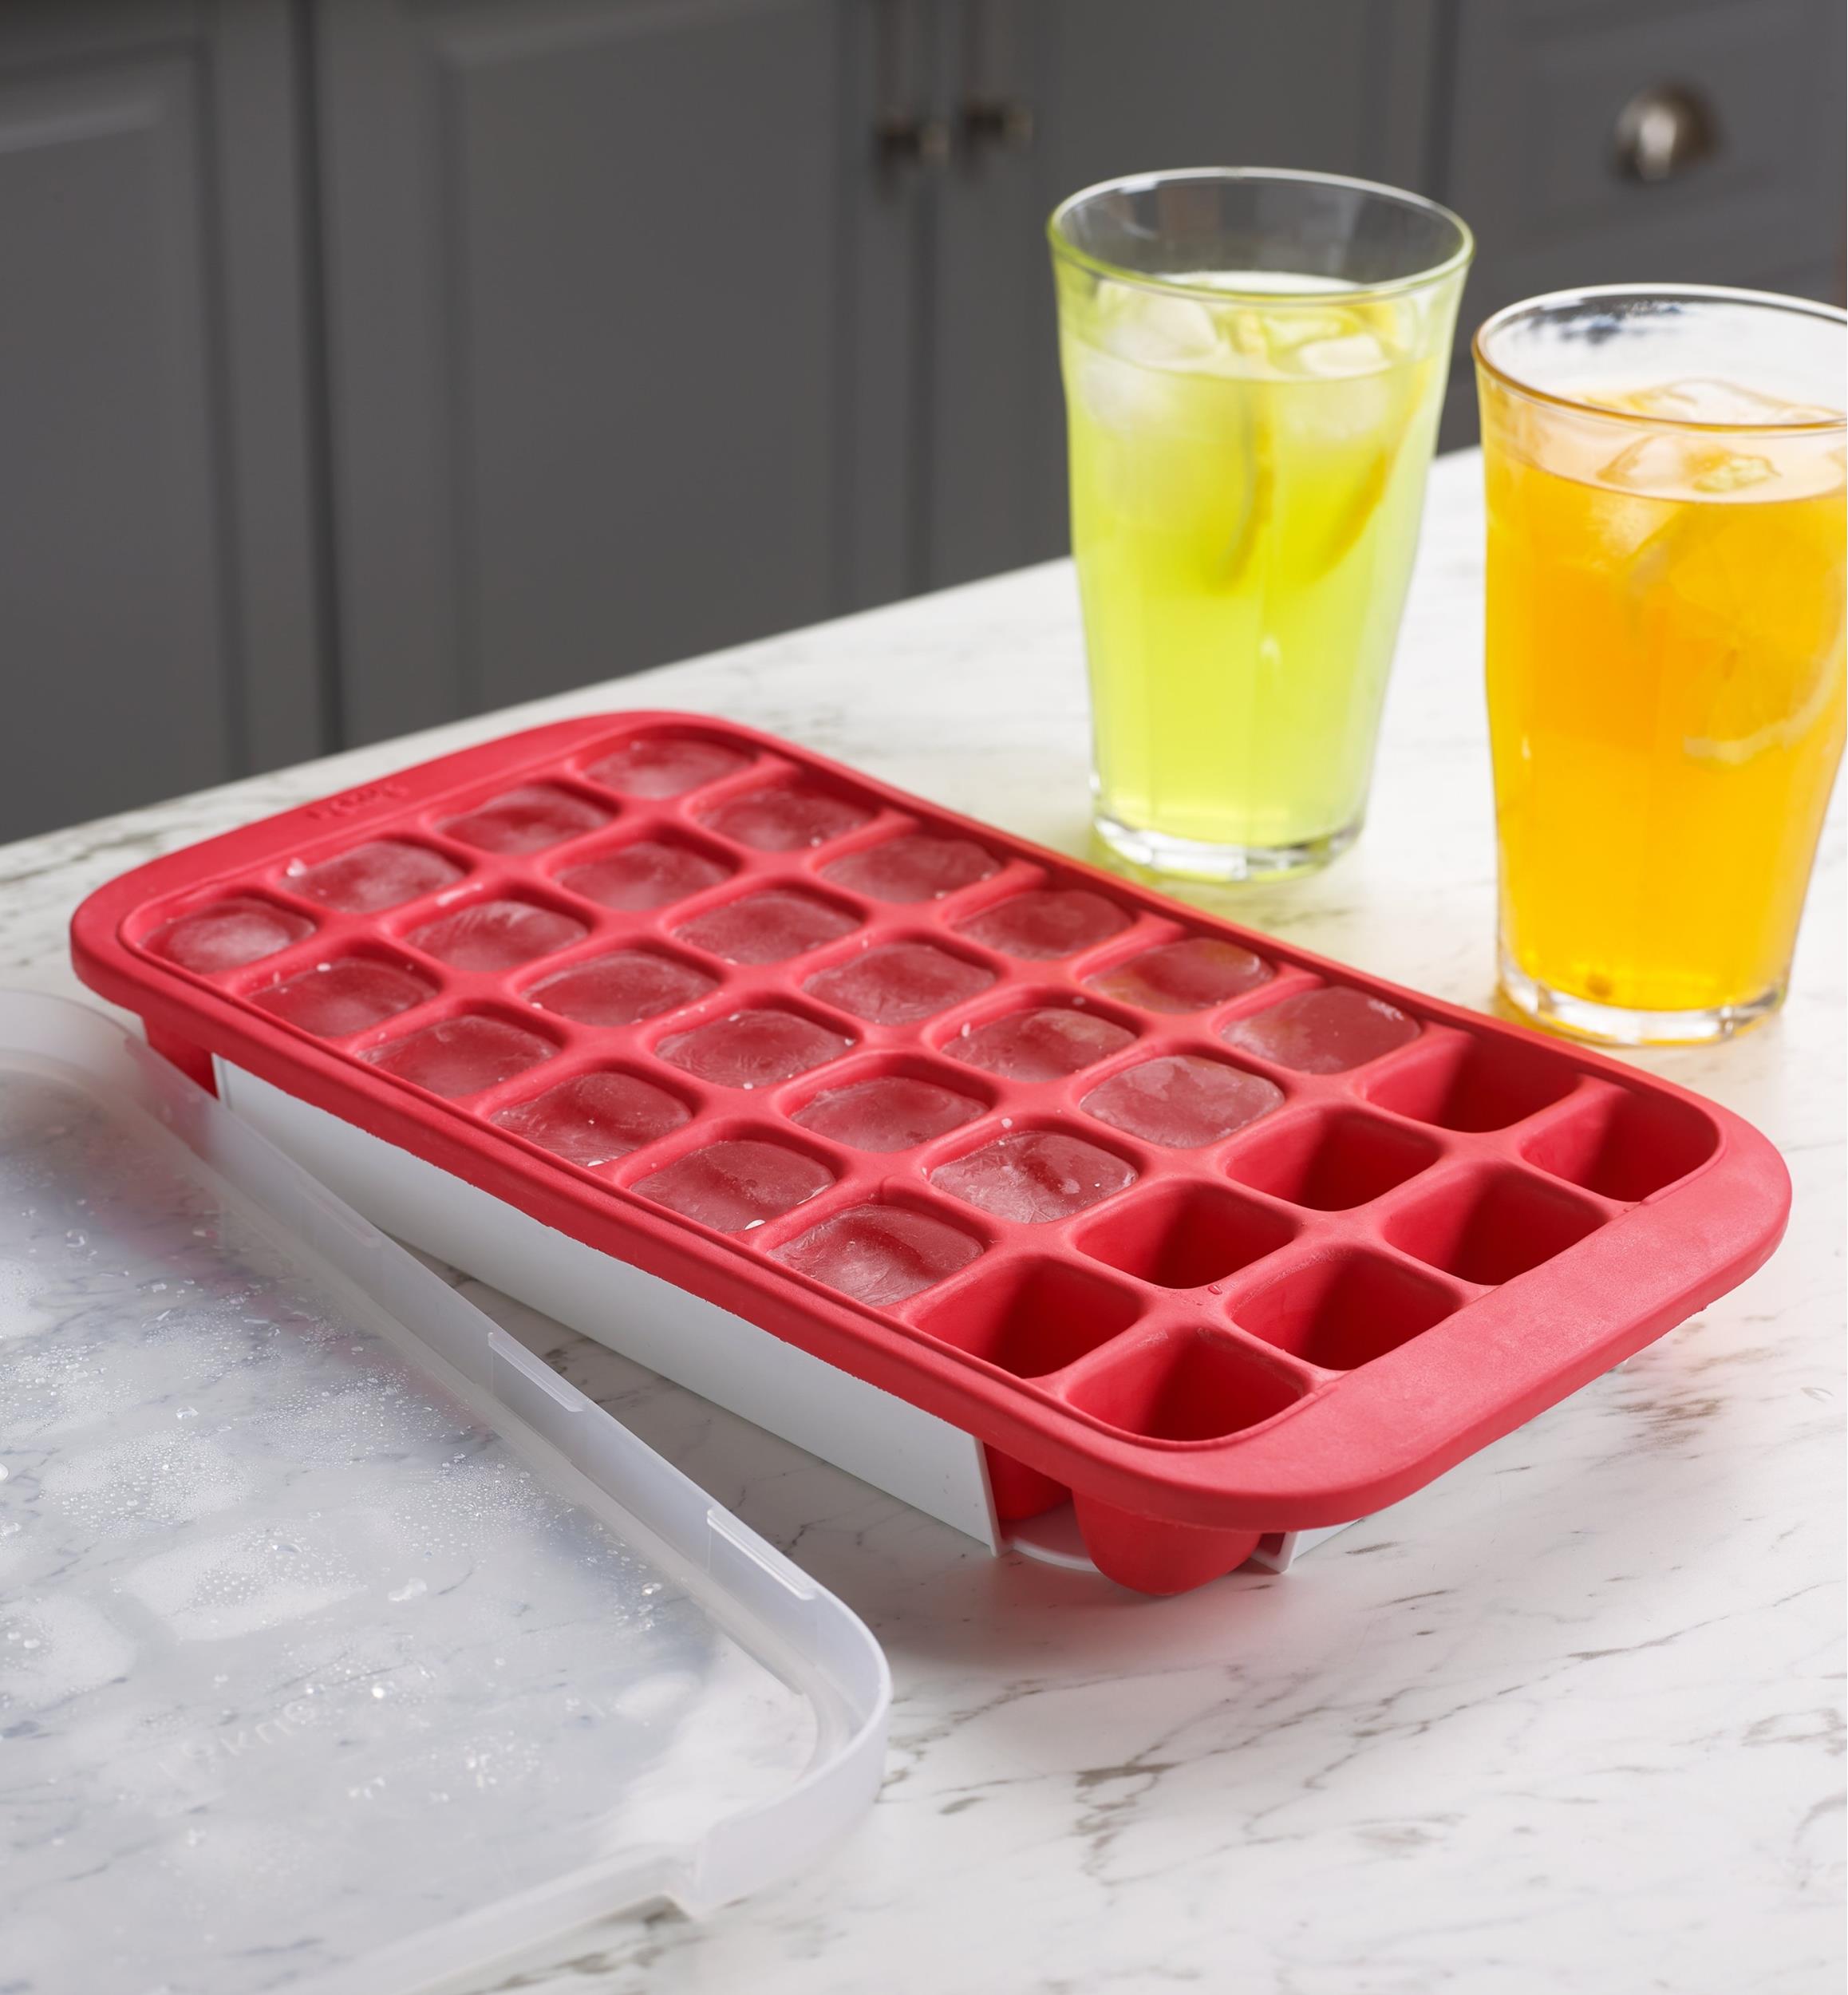 https://assets.leevalley.com/Size5/10113/EV825-extra-large-ice-cube-tray-u-0189.jpg